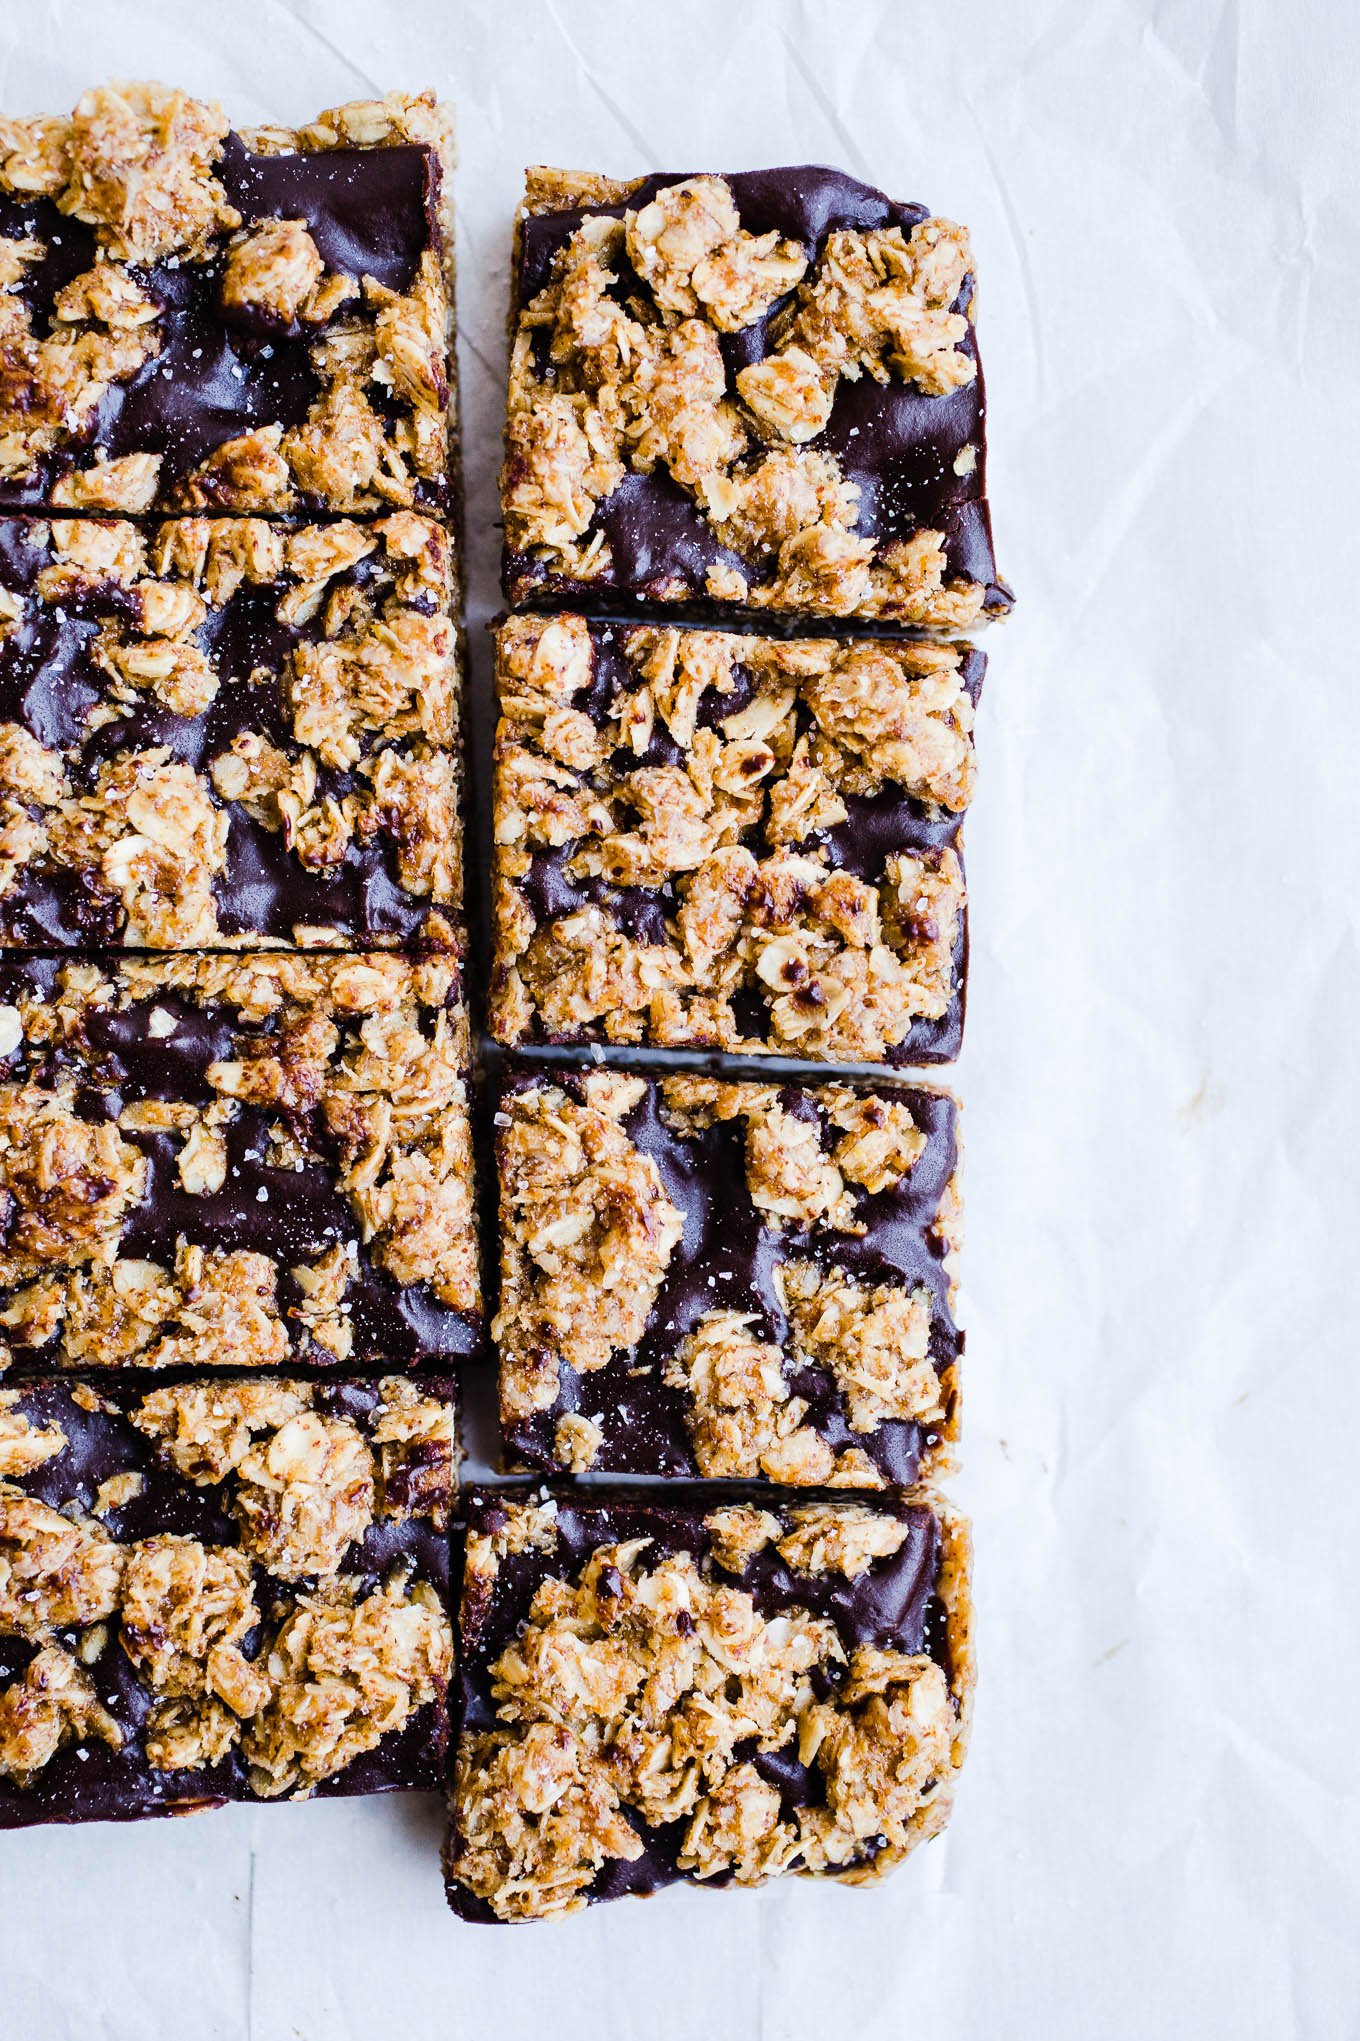 Chocolate Almond Butter Oat Bars on parchment paper